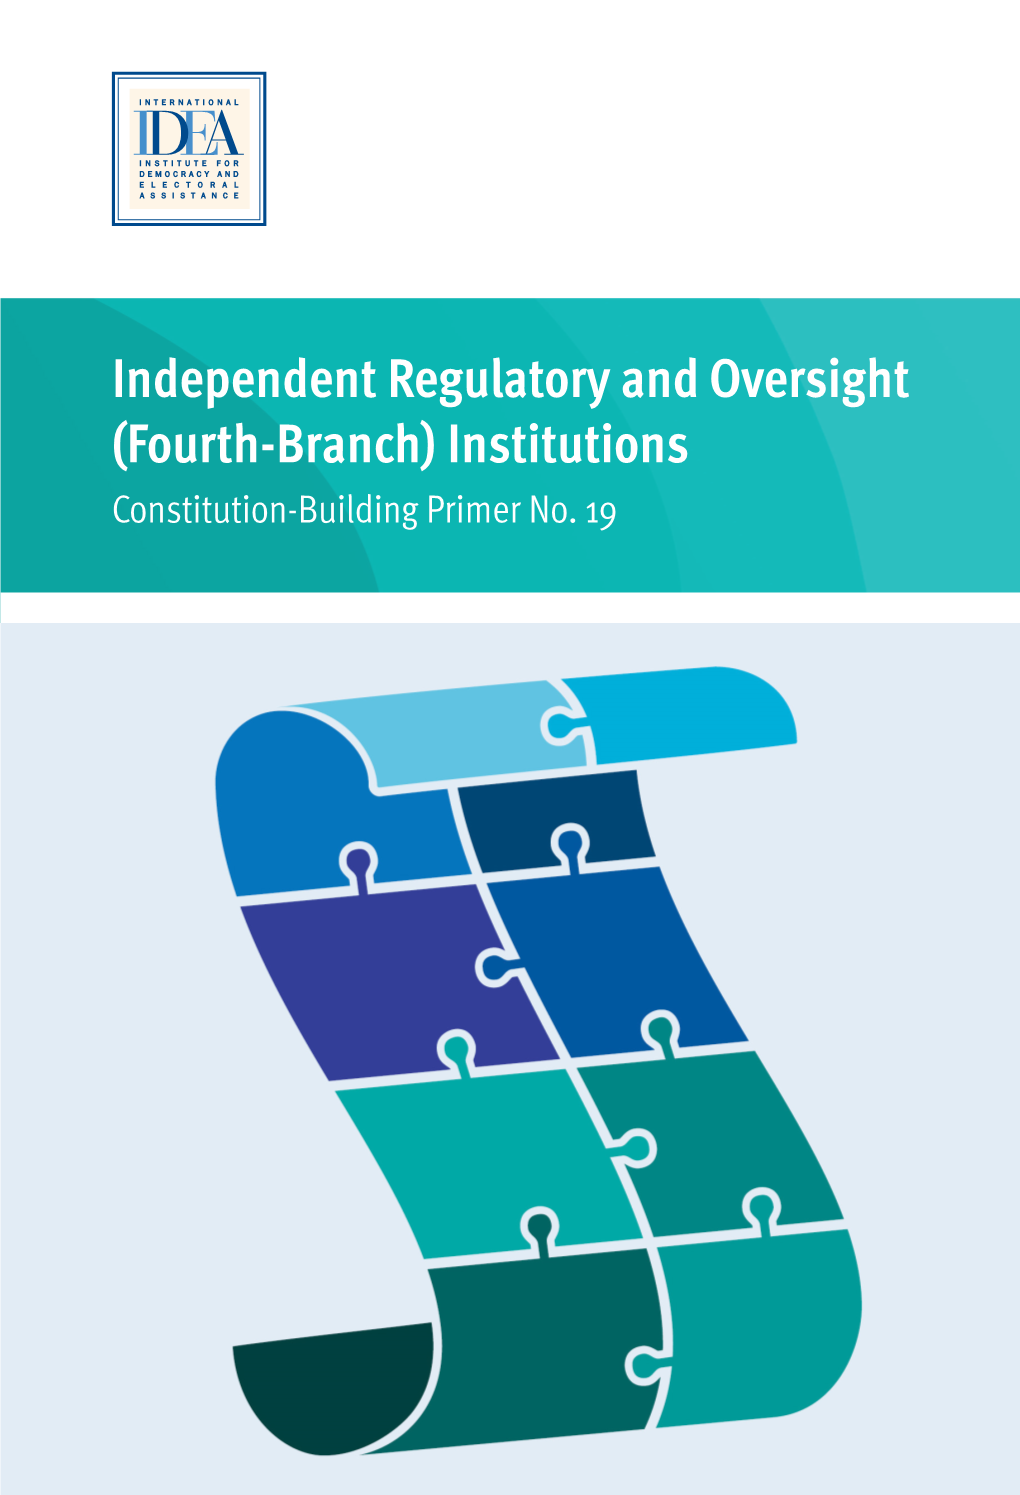 Independent Regulatory and Oversight (Fourth-Branch) Institutions Constitution-Building Primer No